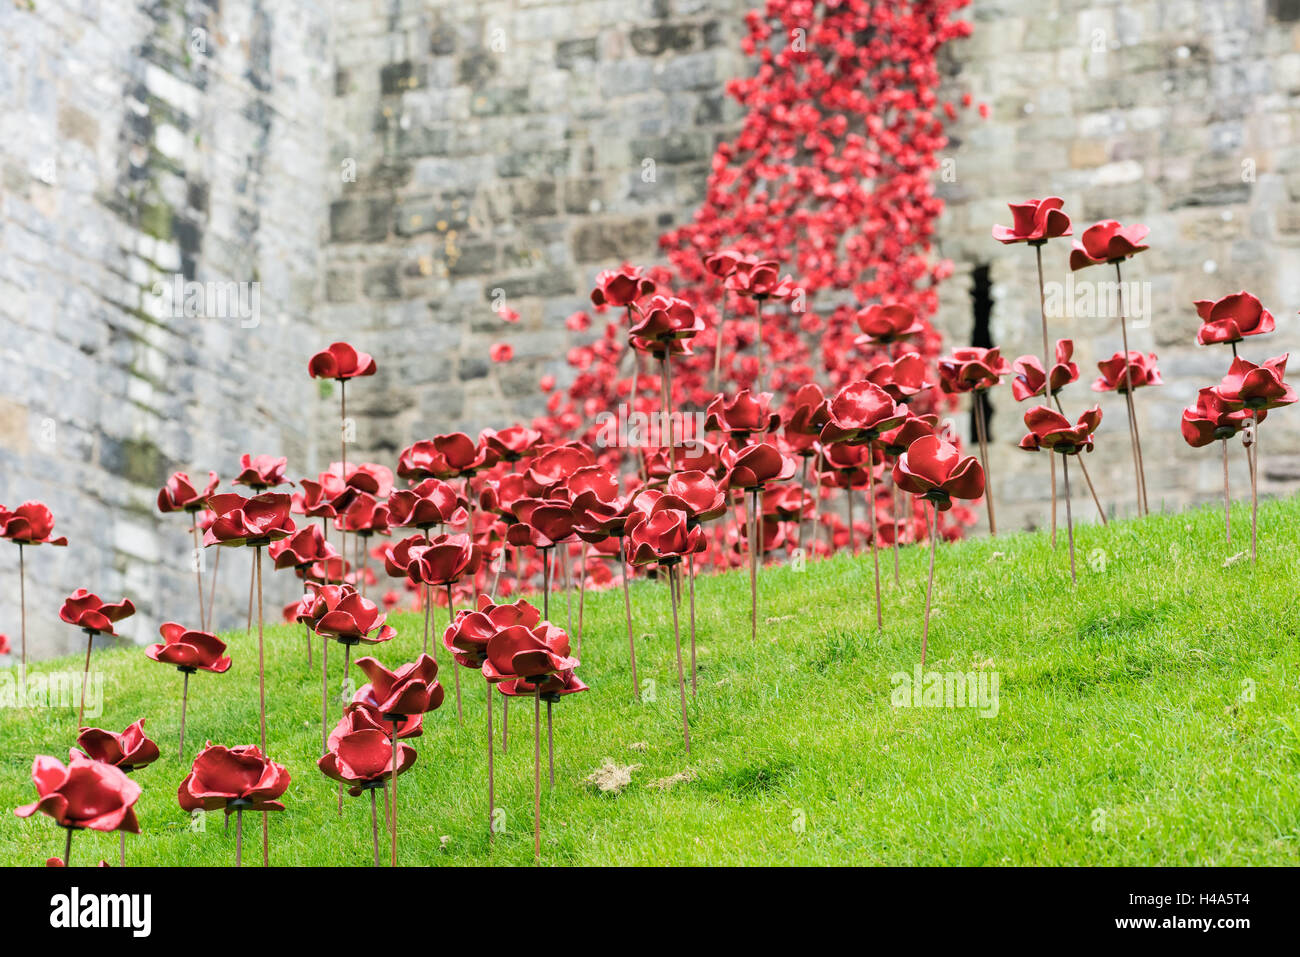 Caernarfon, Wales, 14th October, 2016.  The Weeping Window poppies display from the installation ‘Blood Swept Lands and Seas of Red’ at Caernarfon Castle Credit:  Fotan/Alamy Live News Stock Photo